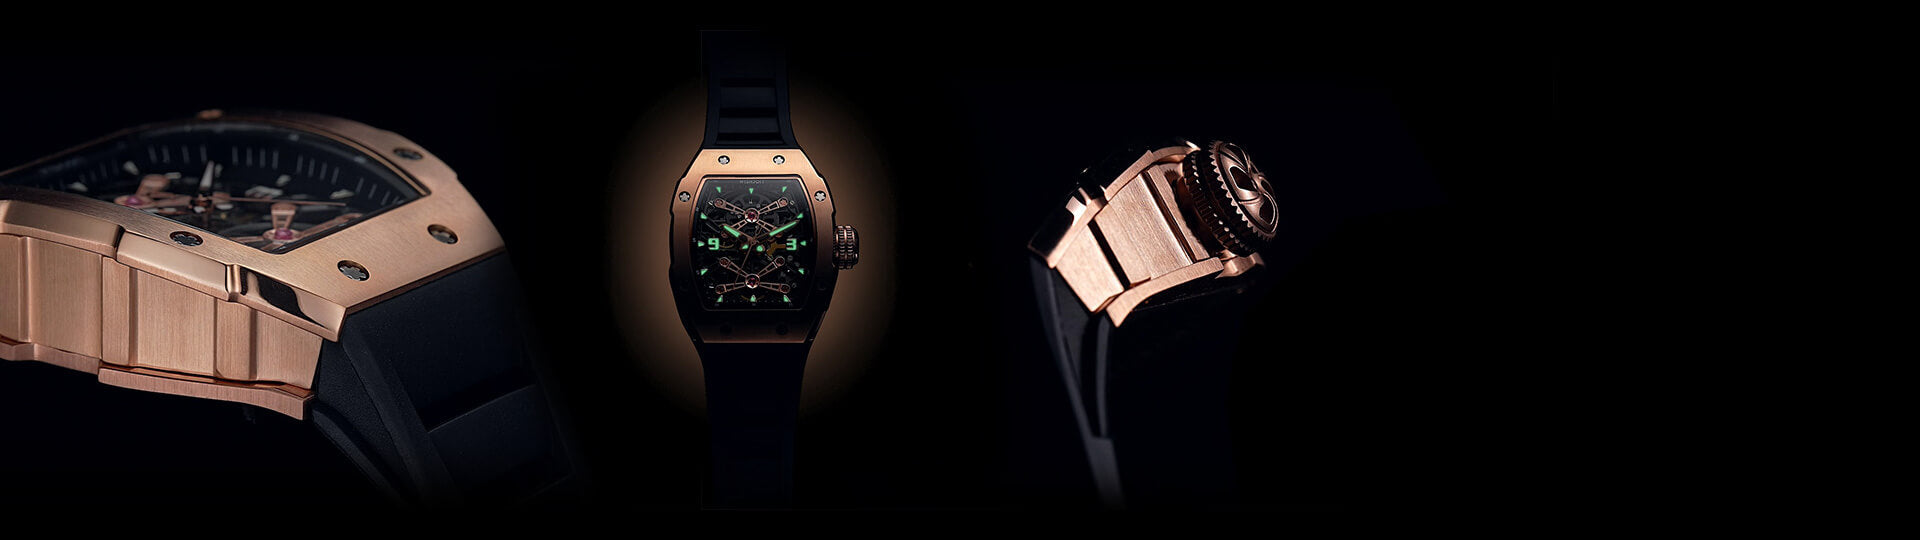 Mens Rose Gold Watches - Shop Mens Rose Gold Watches | Wishdoit watches